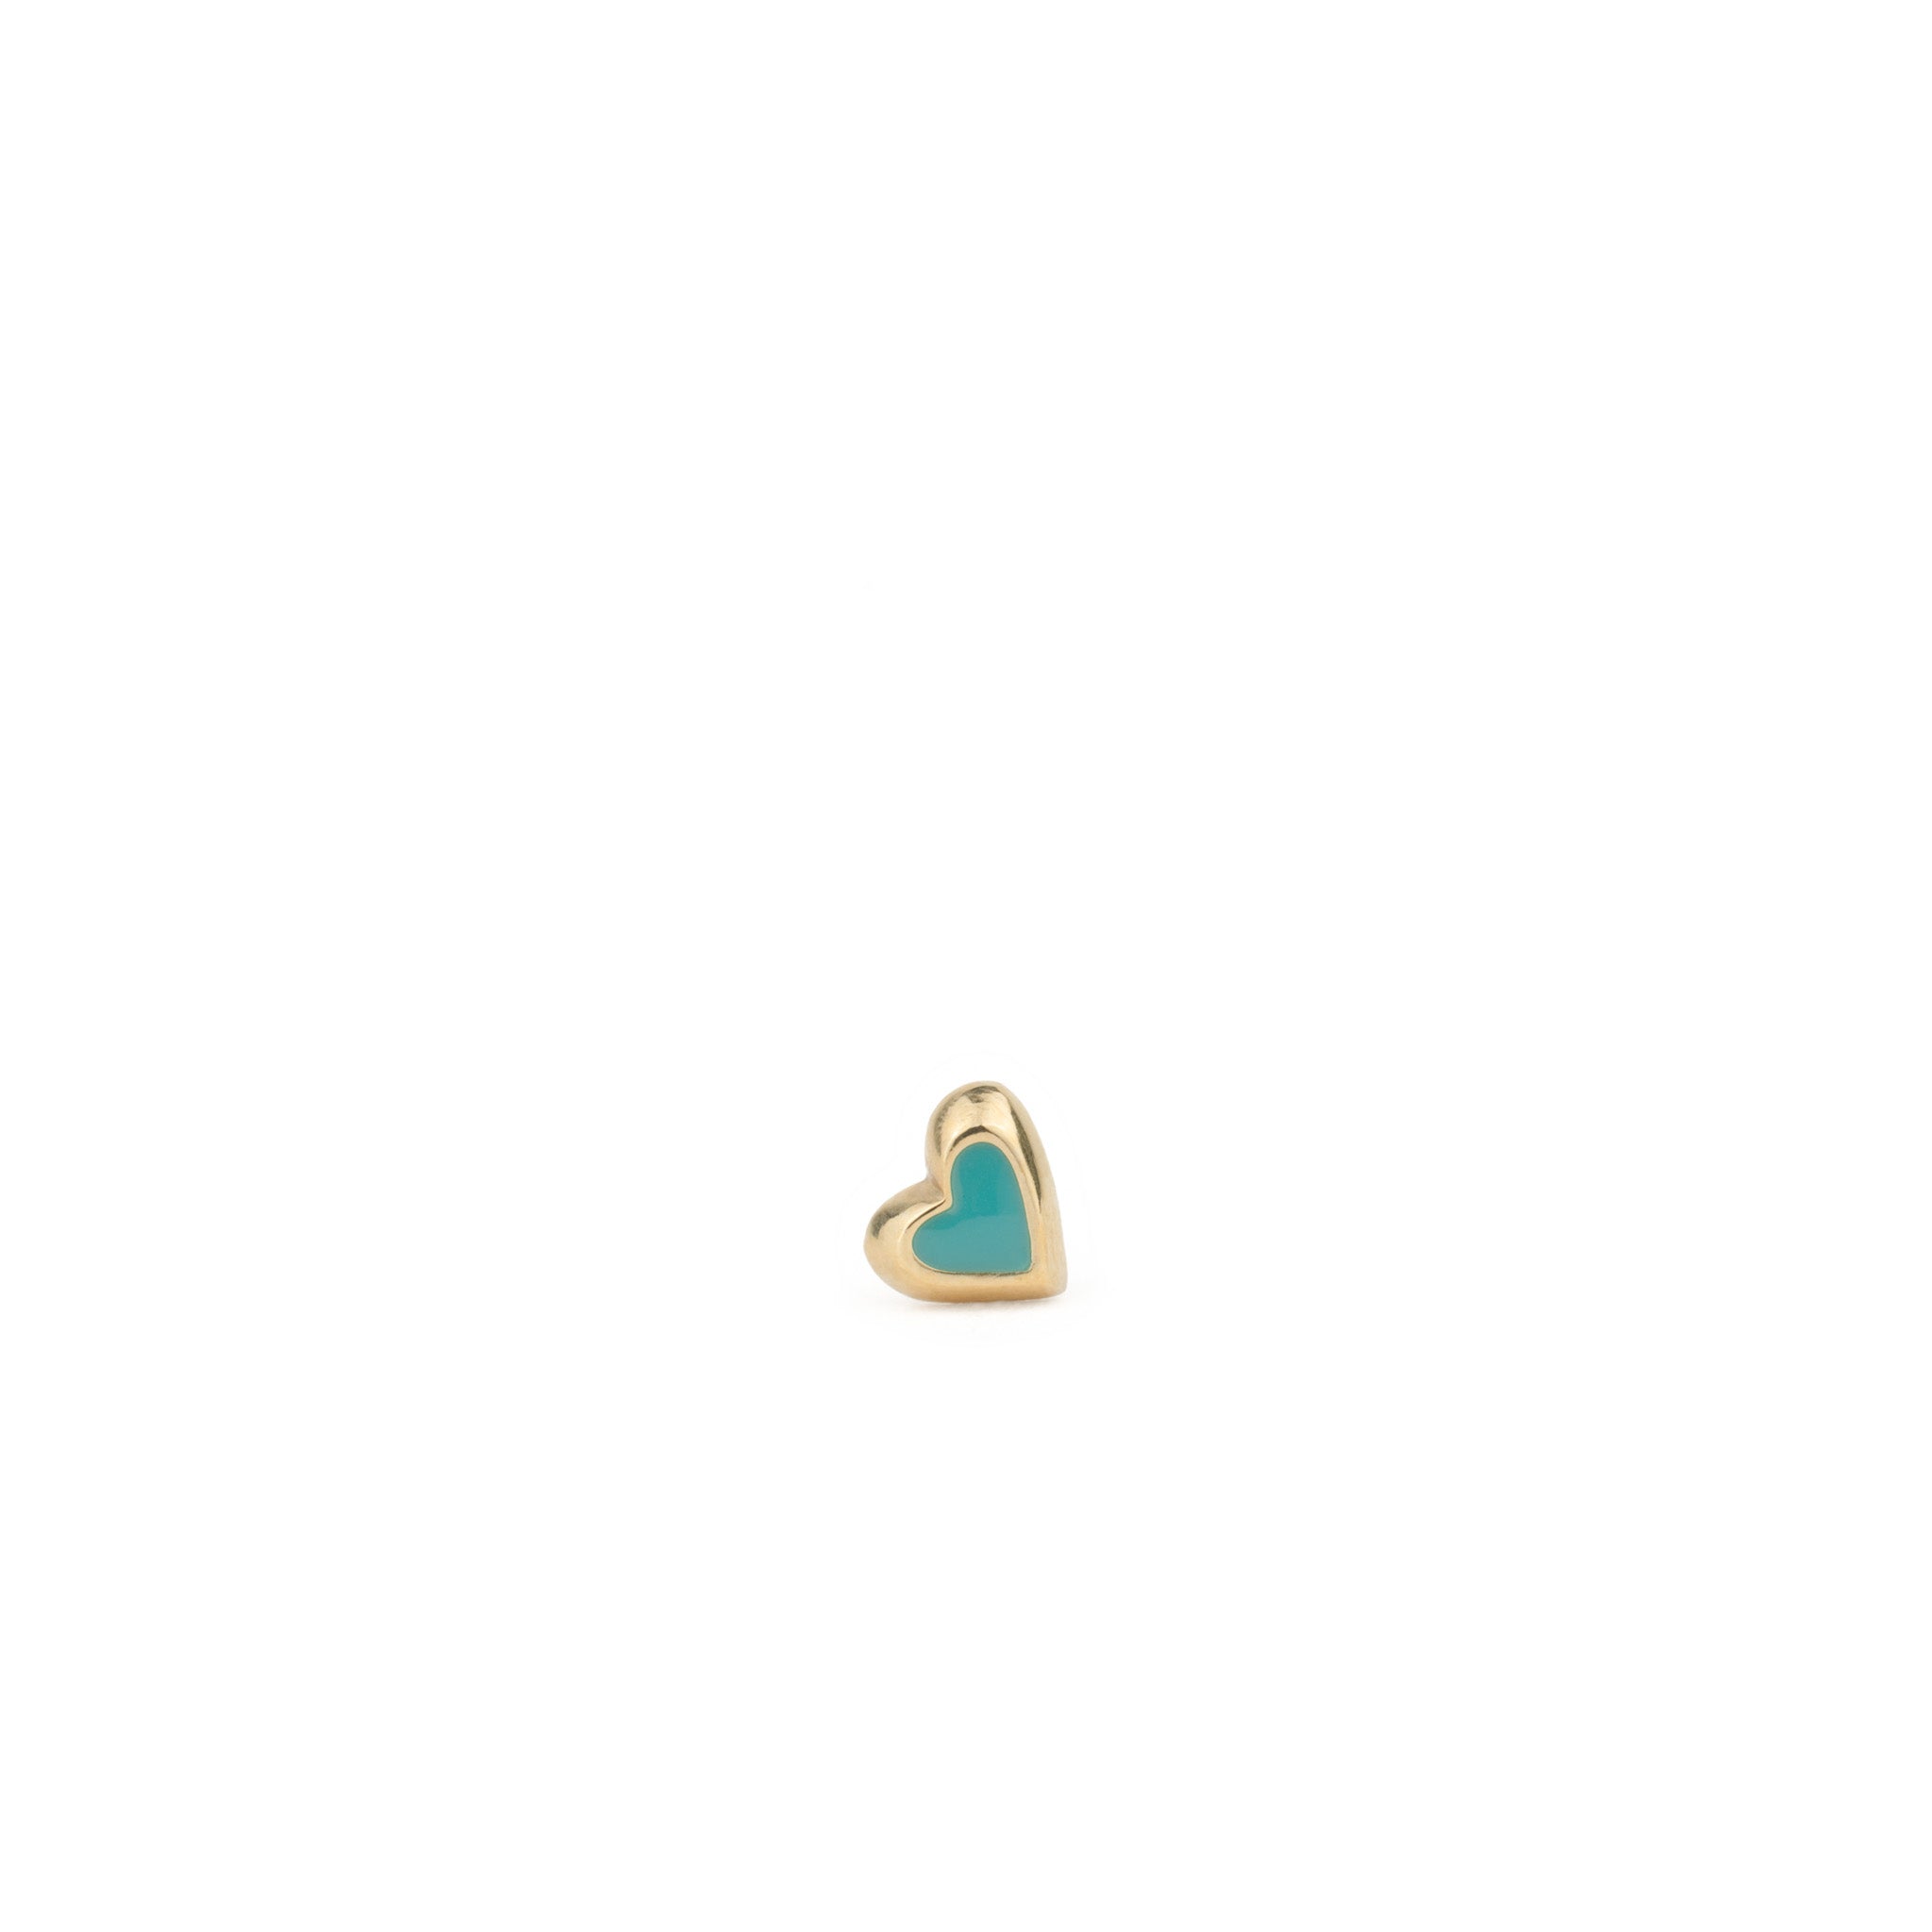 A small Aiden Jae gold and turquoise Mini Heart Stud charm on a white background.